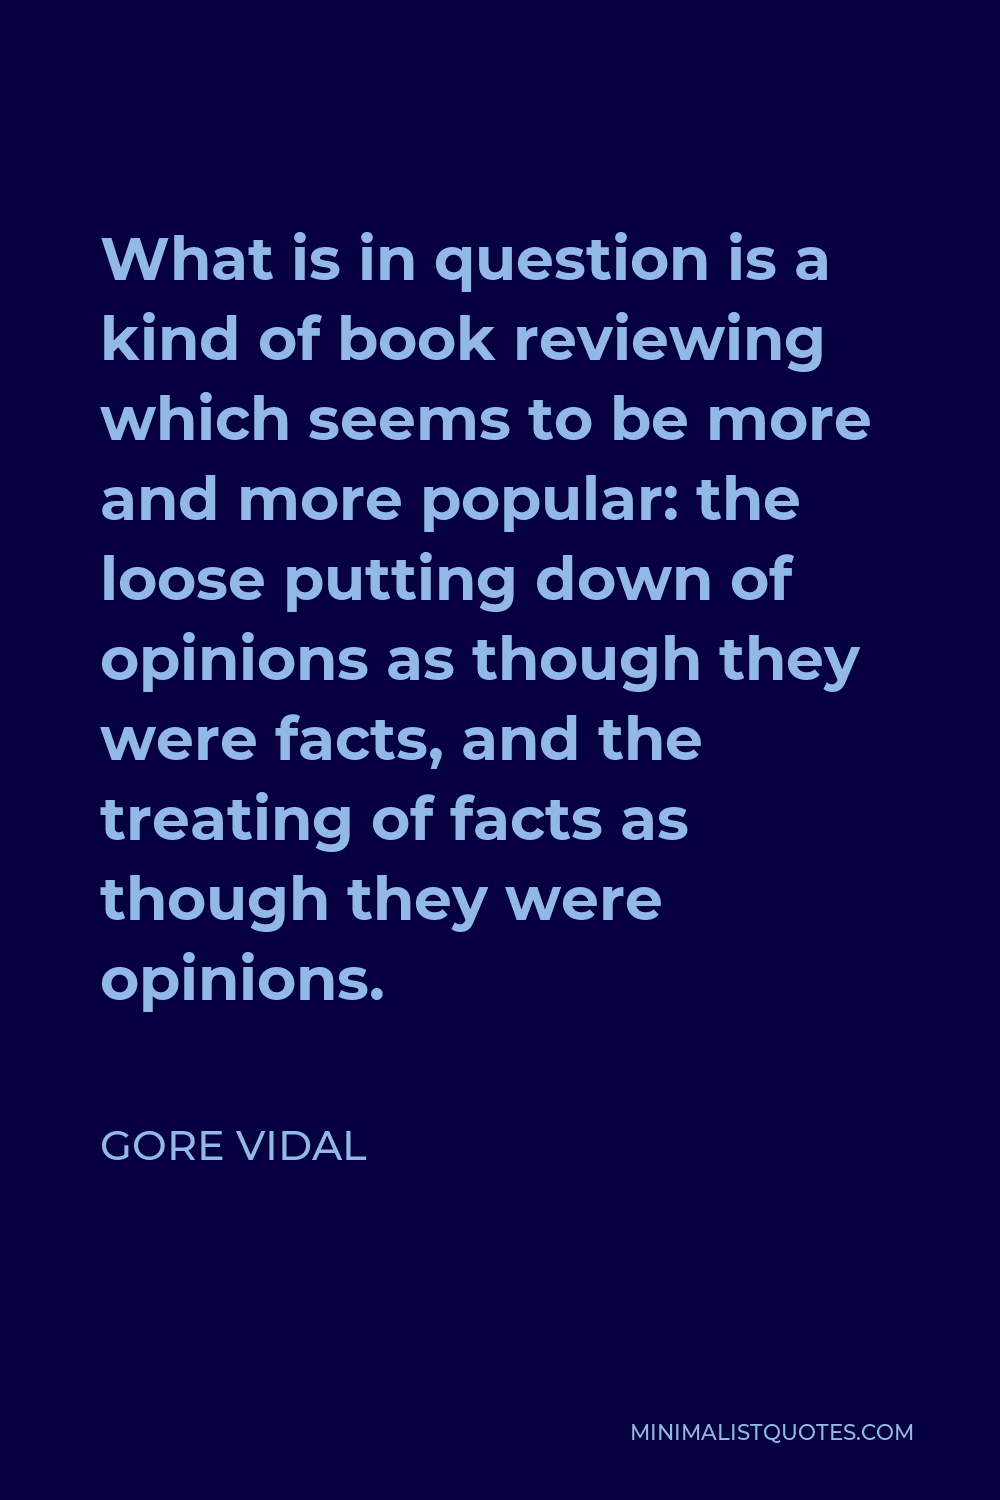 Gore Vidal Quote - What is in question is a kind of book reviewing which seems to be more and more popular: the loose putting down of opinions as though they were facts, and the treating of facts as though they were opinions.